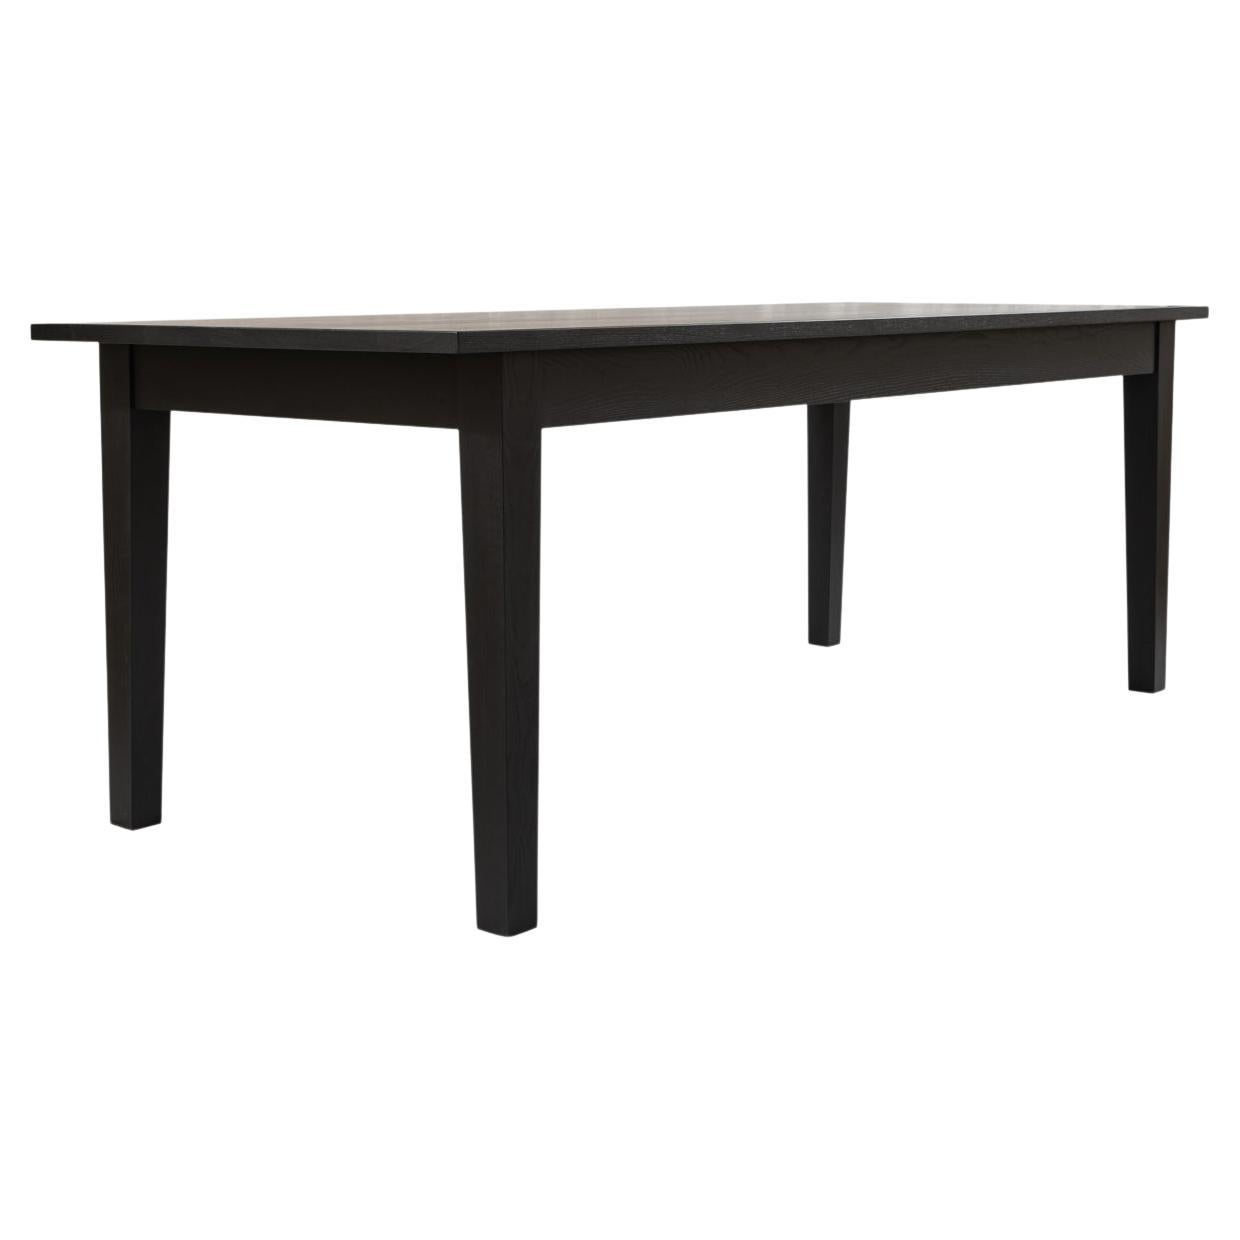 Our modern take on a classic shaker farm table. The New England Farm Table features slim rails, neat but bold reveals, and a chunky tapered leg. When paired with sustainably harvested hardwoods, the crisp contrast yields a classic design with a